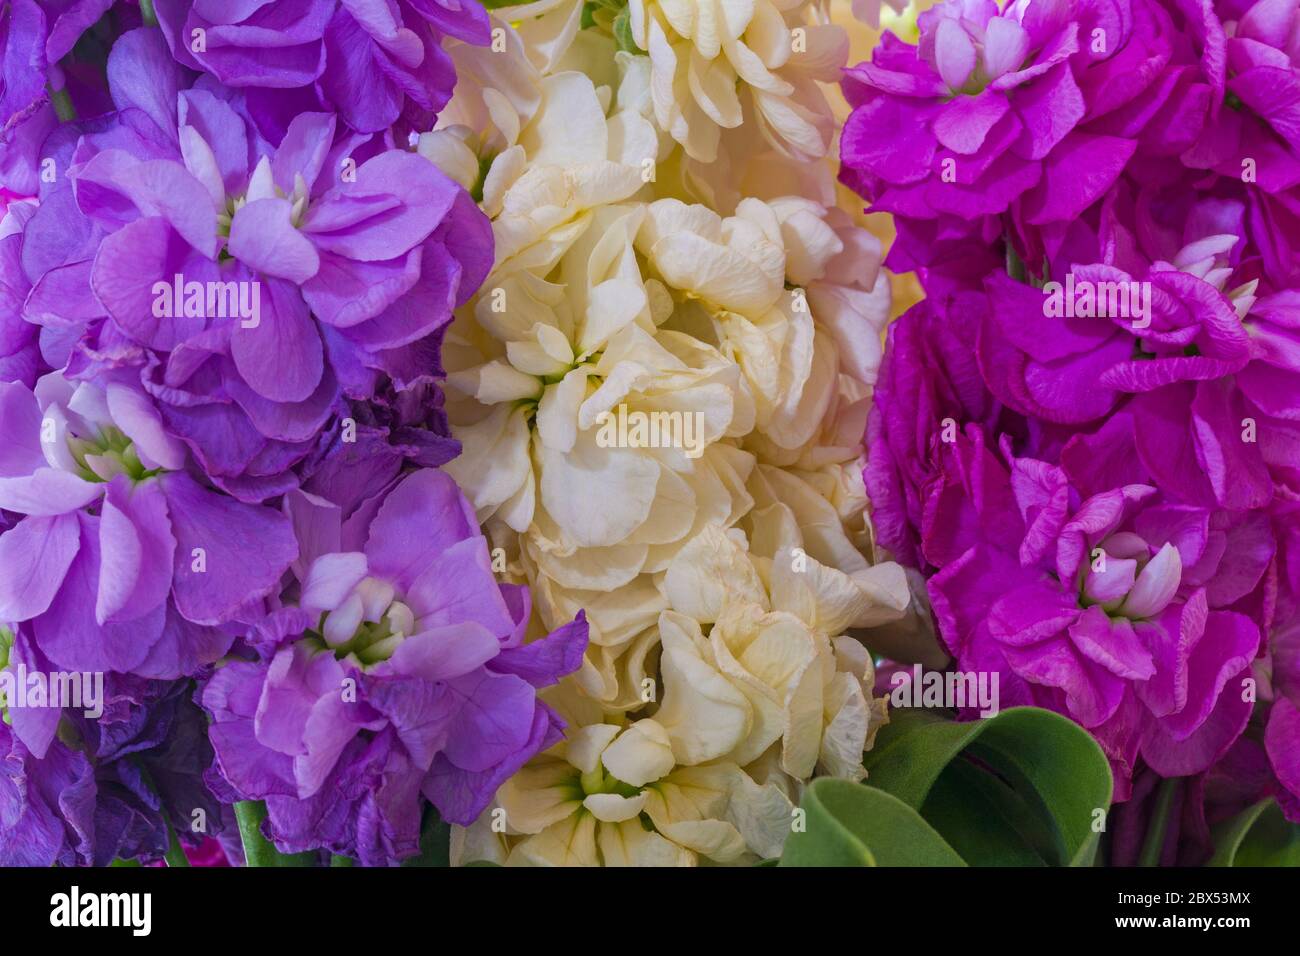 Stocks, Matthiola incana, flower spikes in shades of purple mauve, cream white and pink - close up of flowers Stock Photo